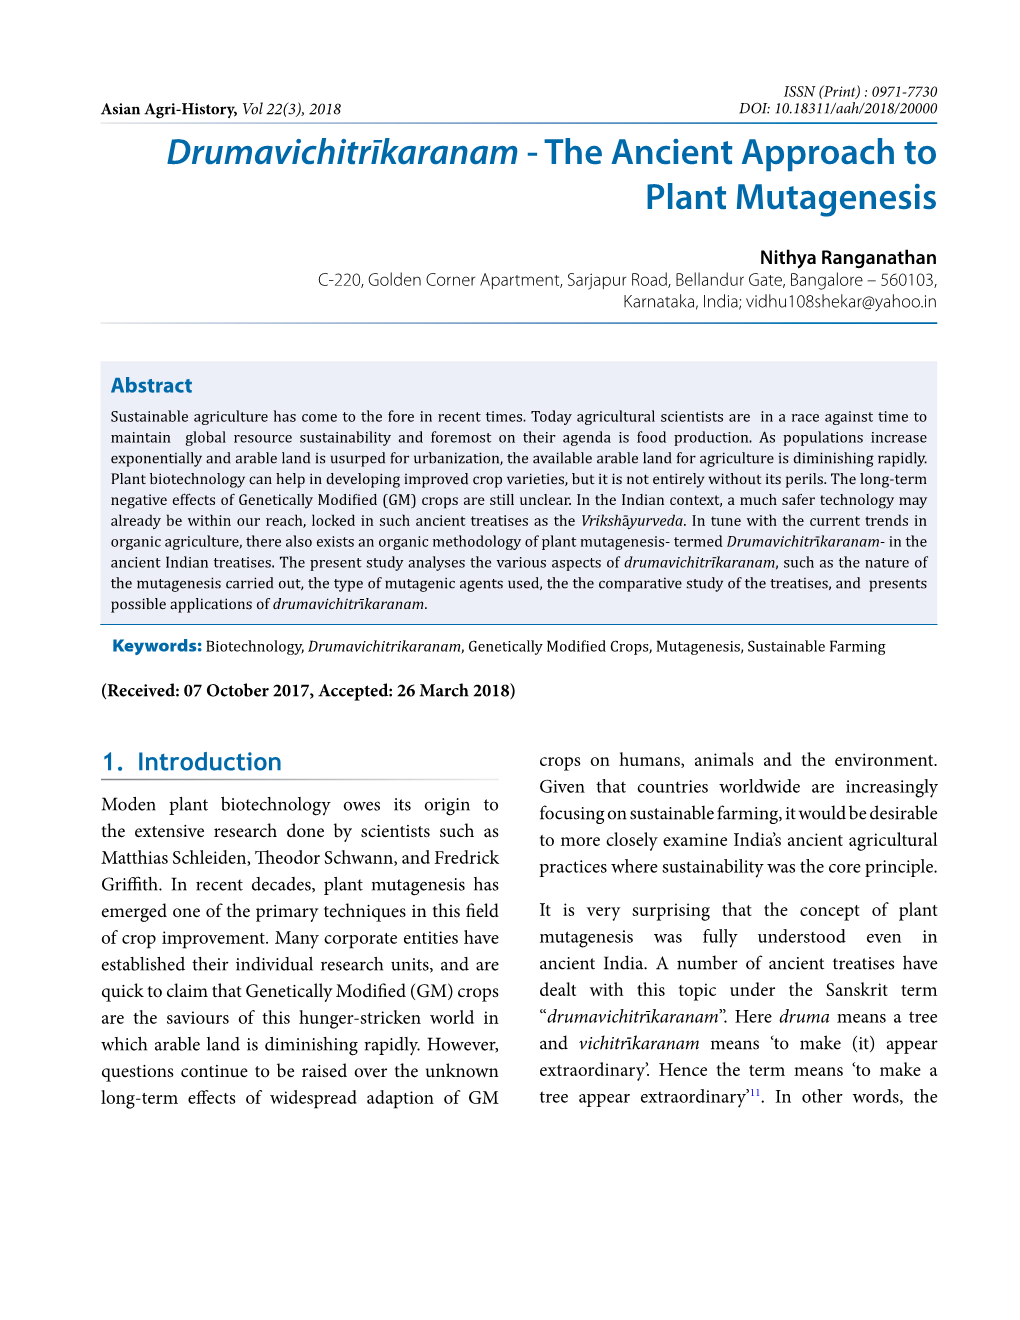 The Ancient Approach to Plant Mutagenesis